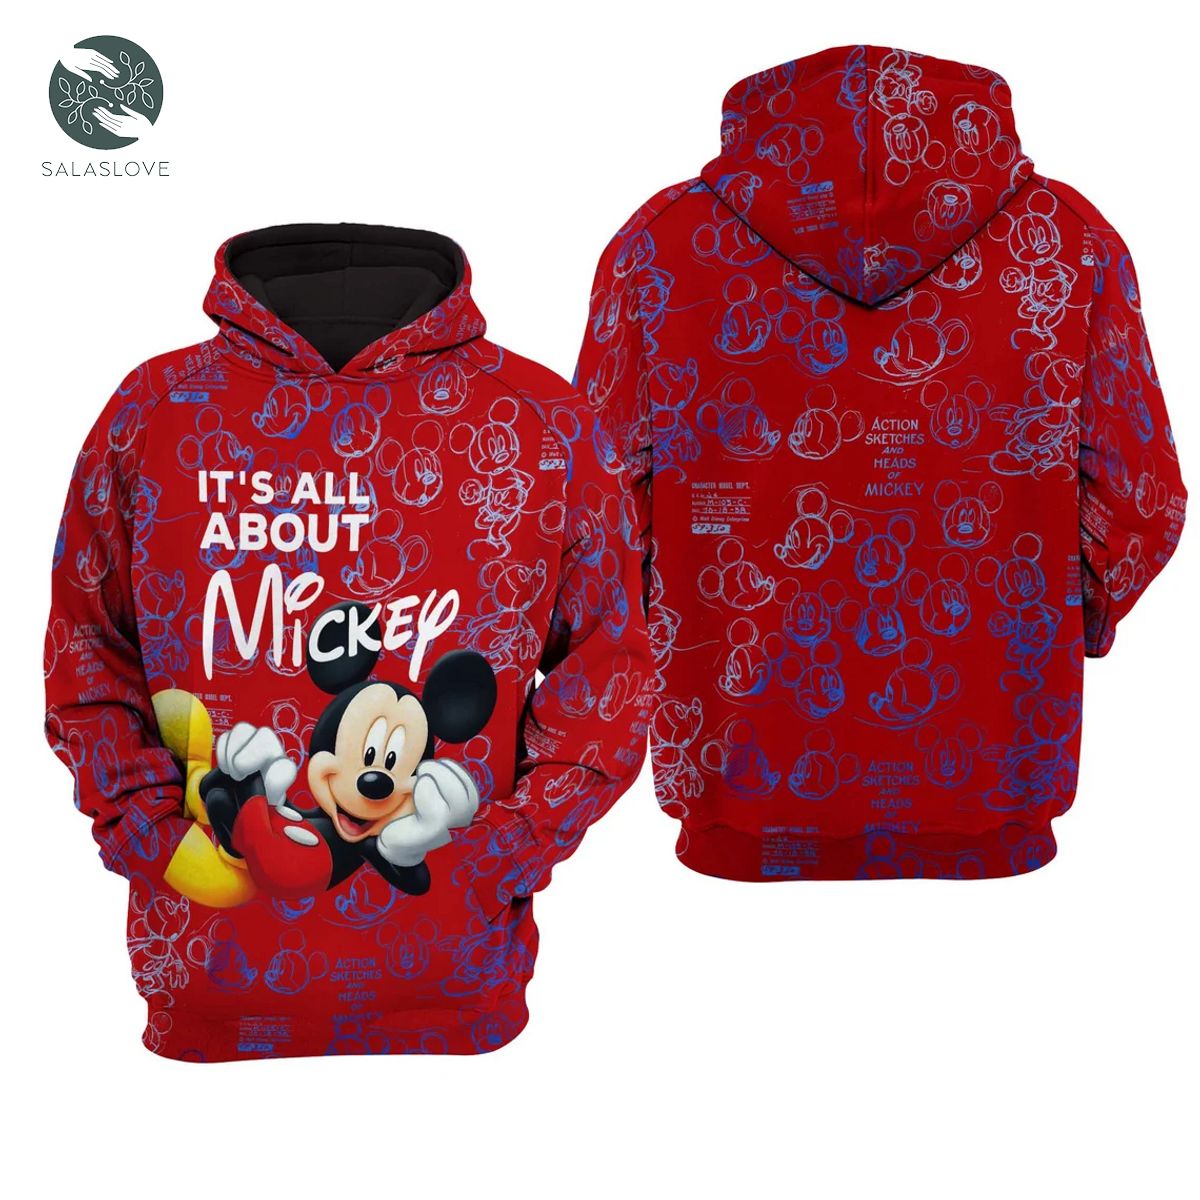 It's All About Mickey Disney Hoodie Stylist Unisex Cartoon Graphic Outfits